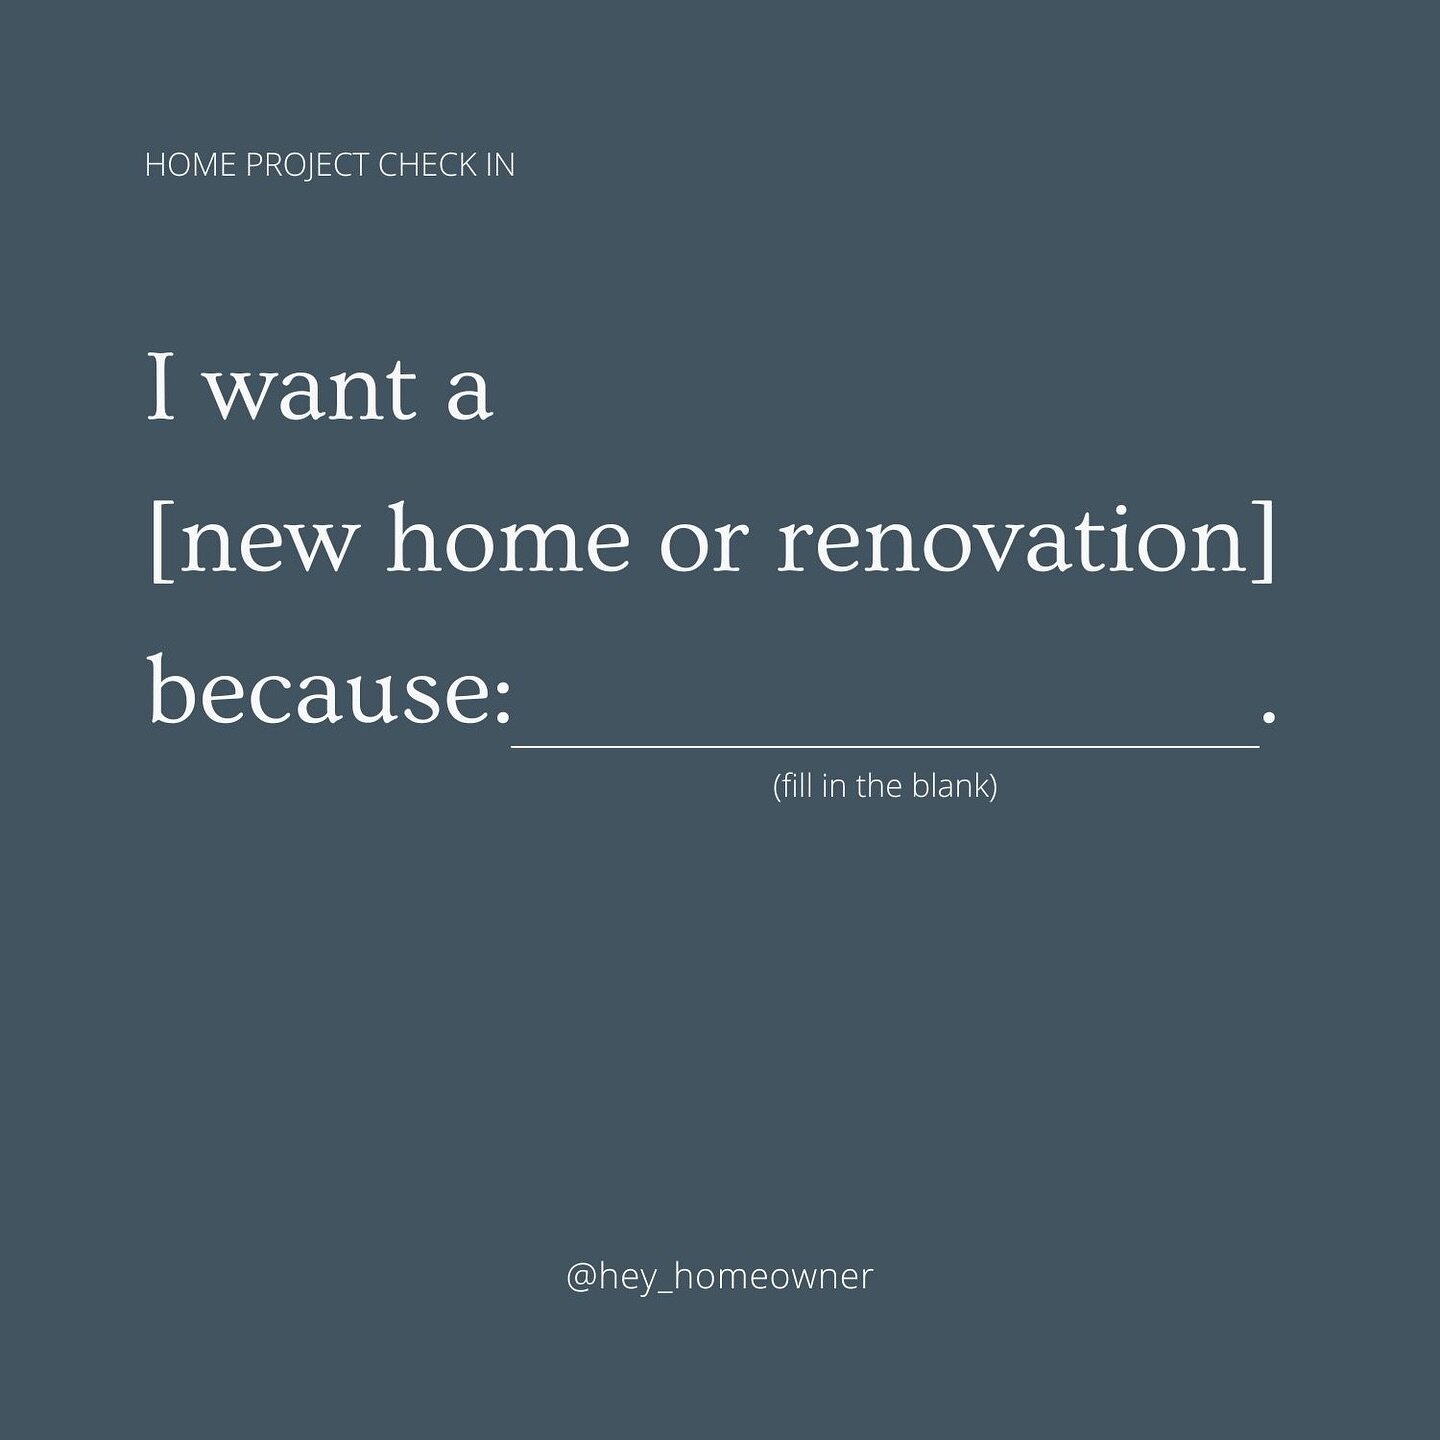 How well do you know your project?

To accomplish a home project really well&mdash;first, you have to get really clear.

&ldquo;I want a (renovation or new home) because __________.&rdquo;
Fill in that blank. Make a list of your reasons why.

Why is 